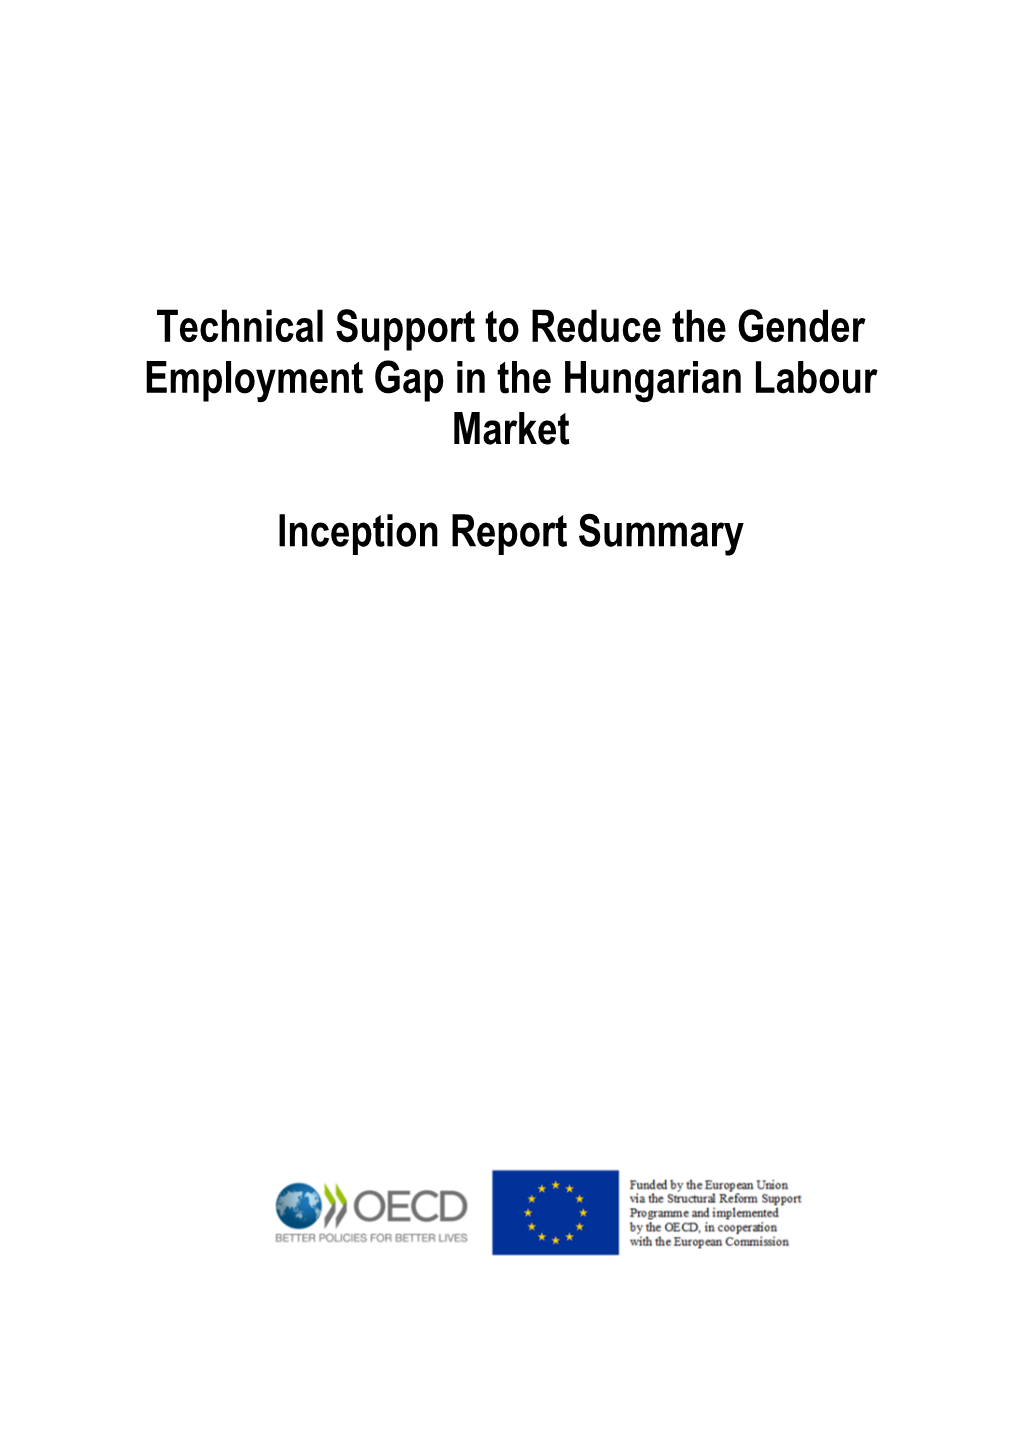 Technical Support to Reduce the Gender Employment Gap in the Hungarian Labour Market